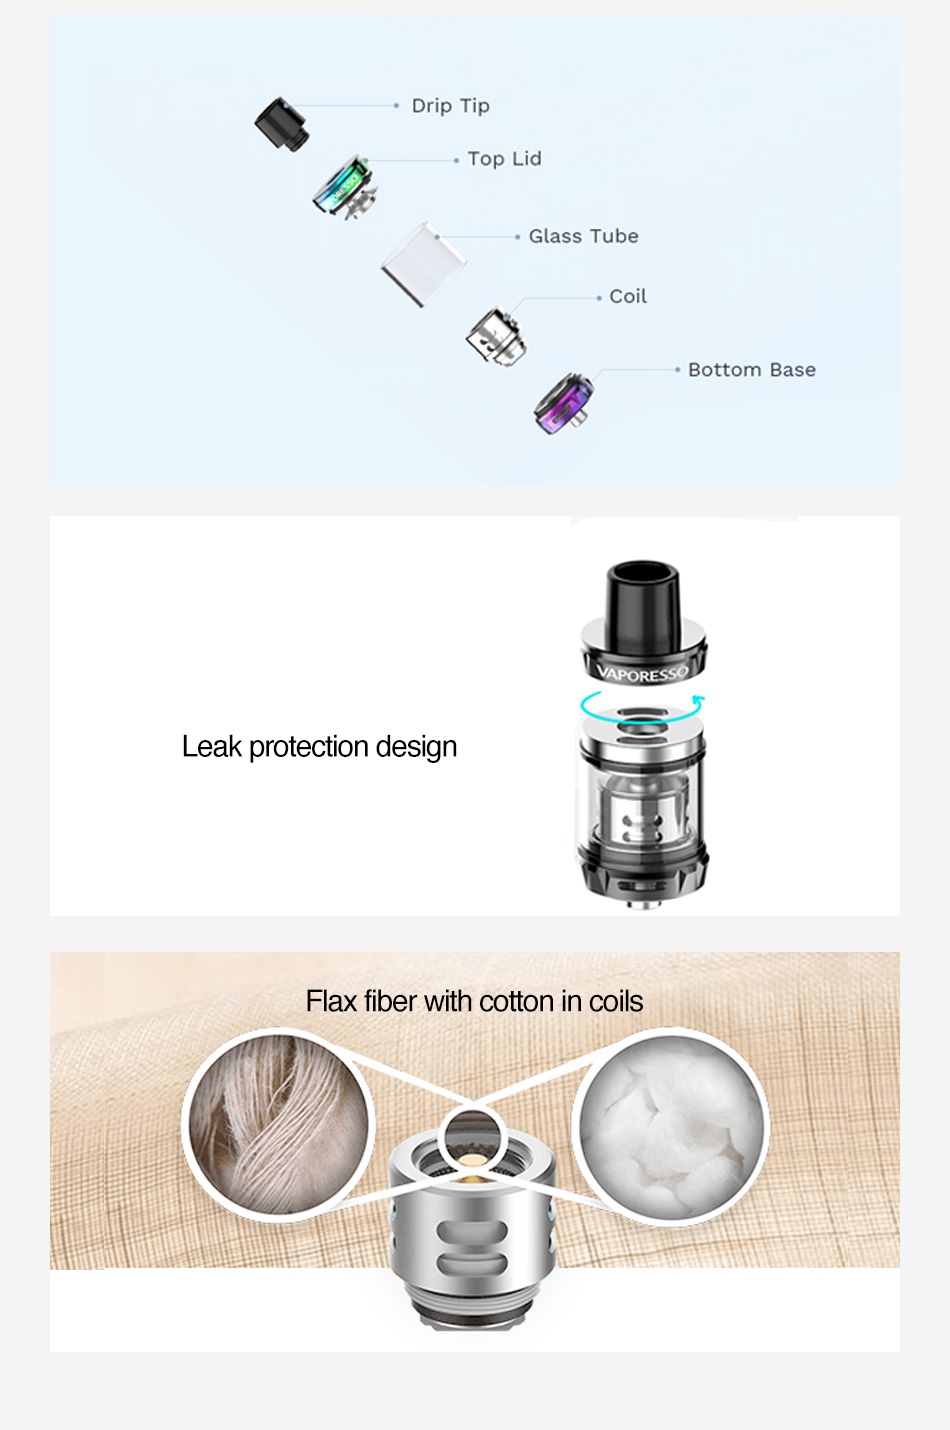 Vaporesso SKRR-S Mini Subohm Tank 2ml/3.5ml Drip Tip Top Lid Glass Tube Coil Bottom Base VAPORES Leak protection design Flax fiber with cotton in coils